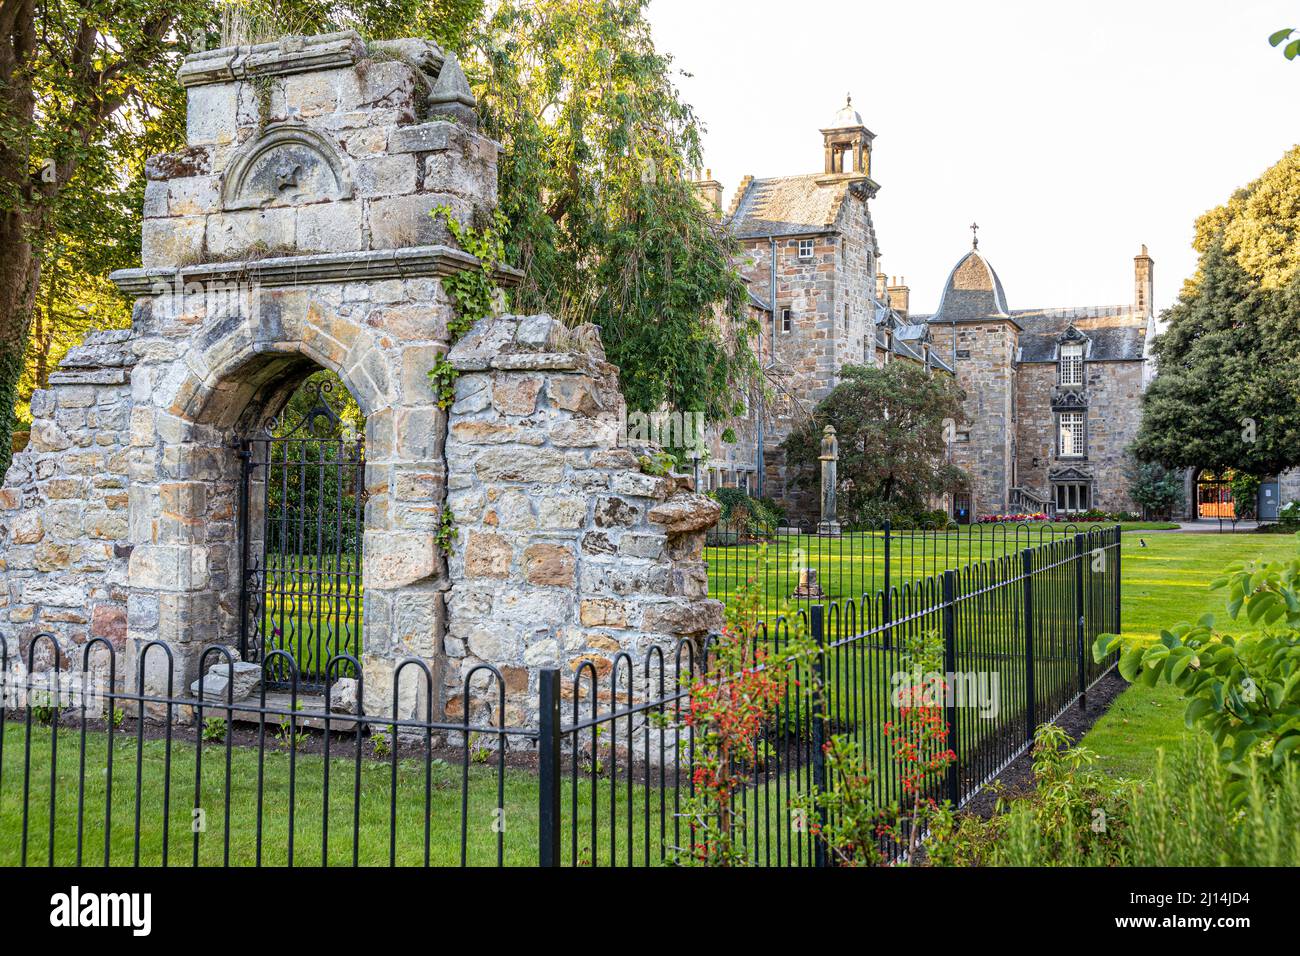 An old gateway at the end of St Marys College Quadrangle, University of St Andrews, Fife, Scotland UK Stock Photo